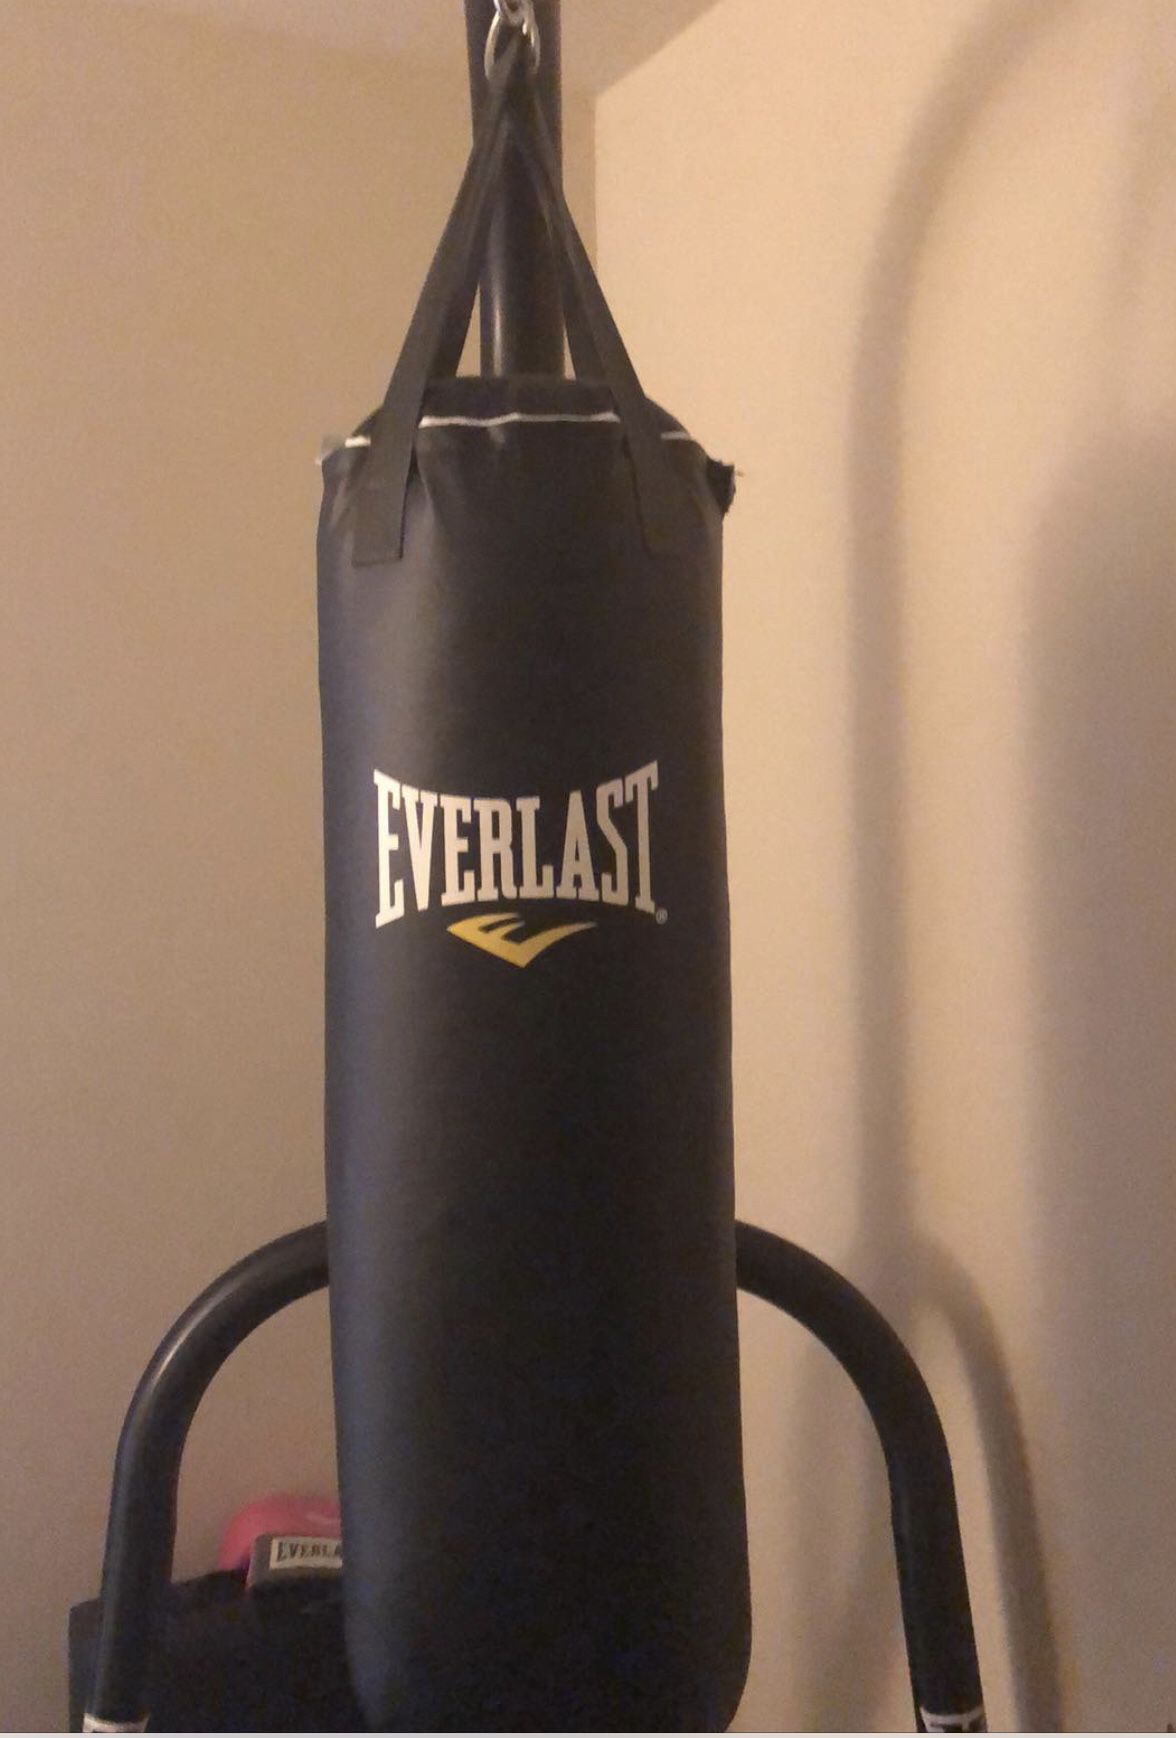 Everlast heavy bag and stand.